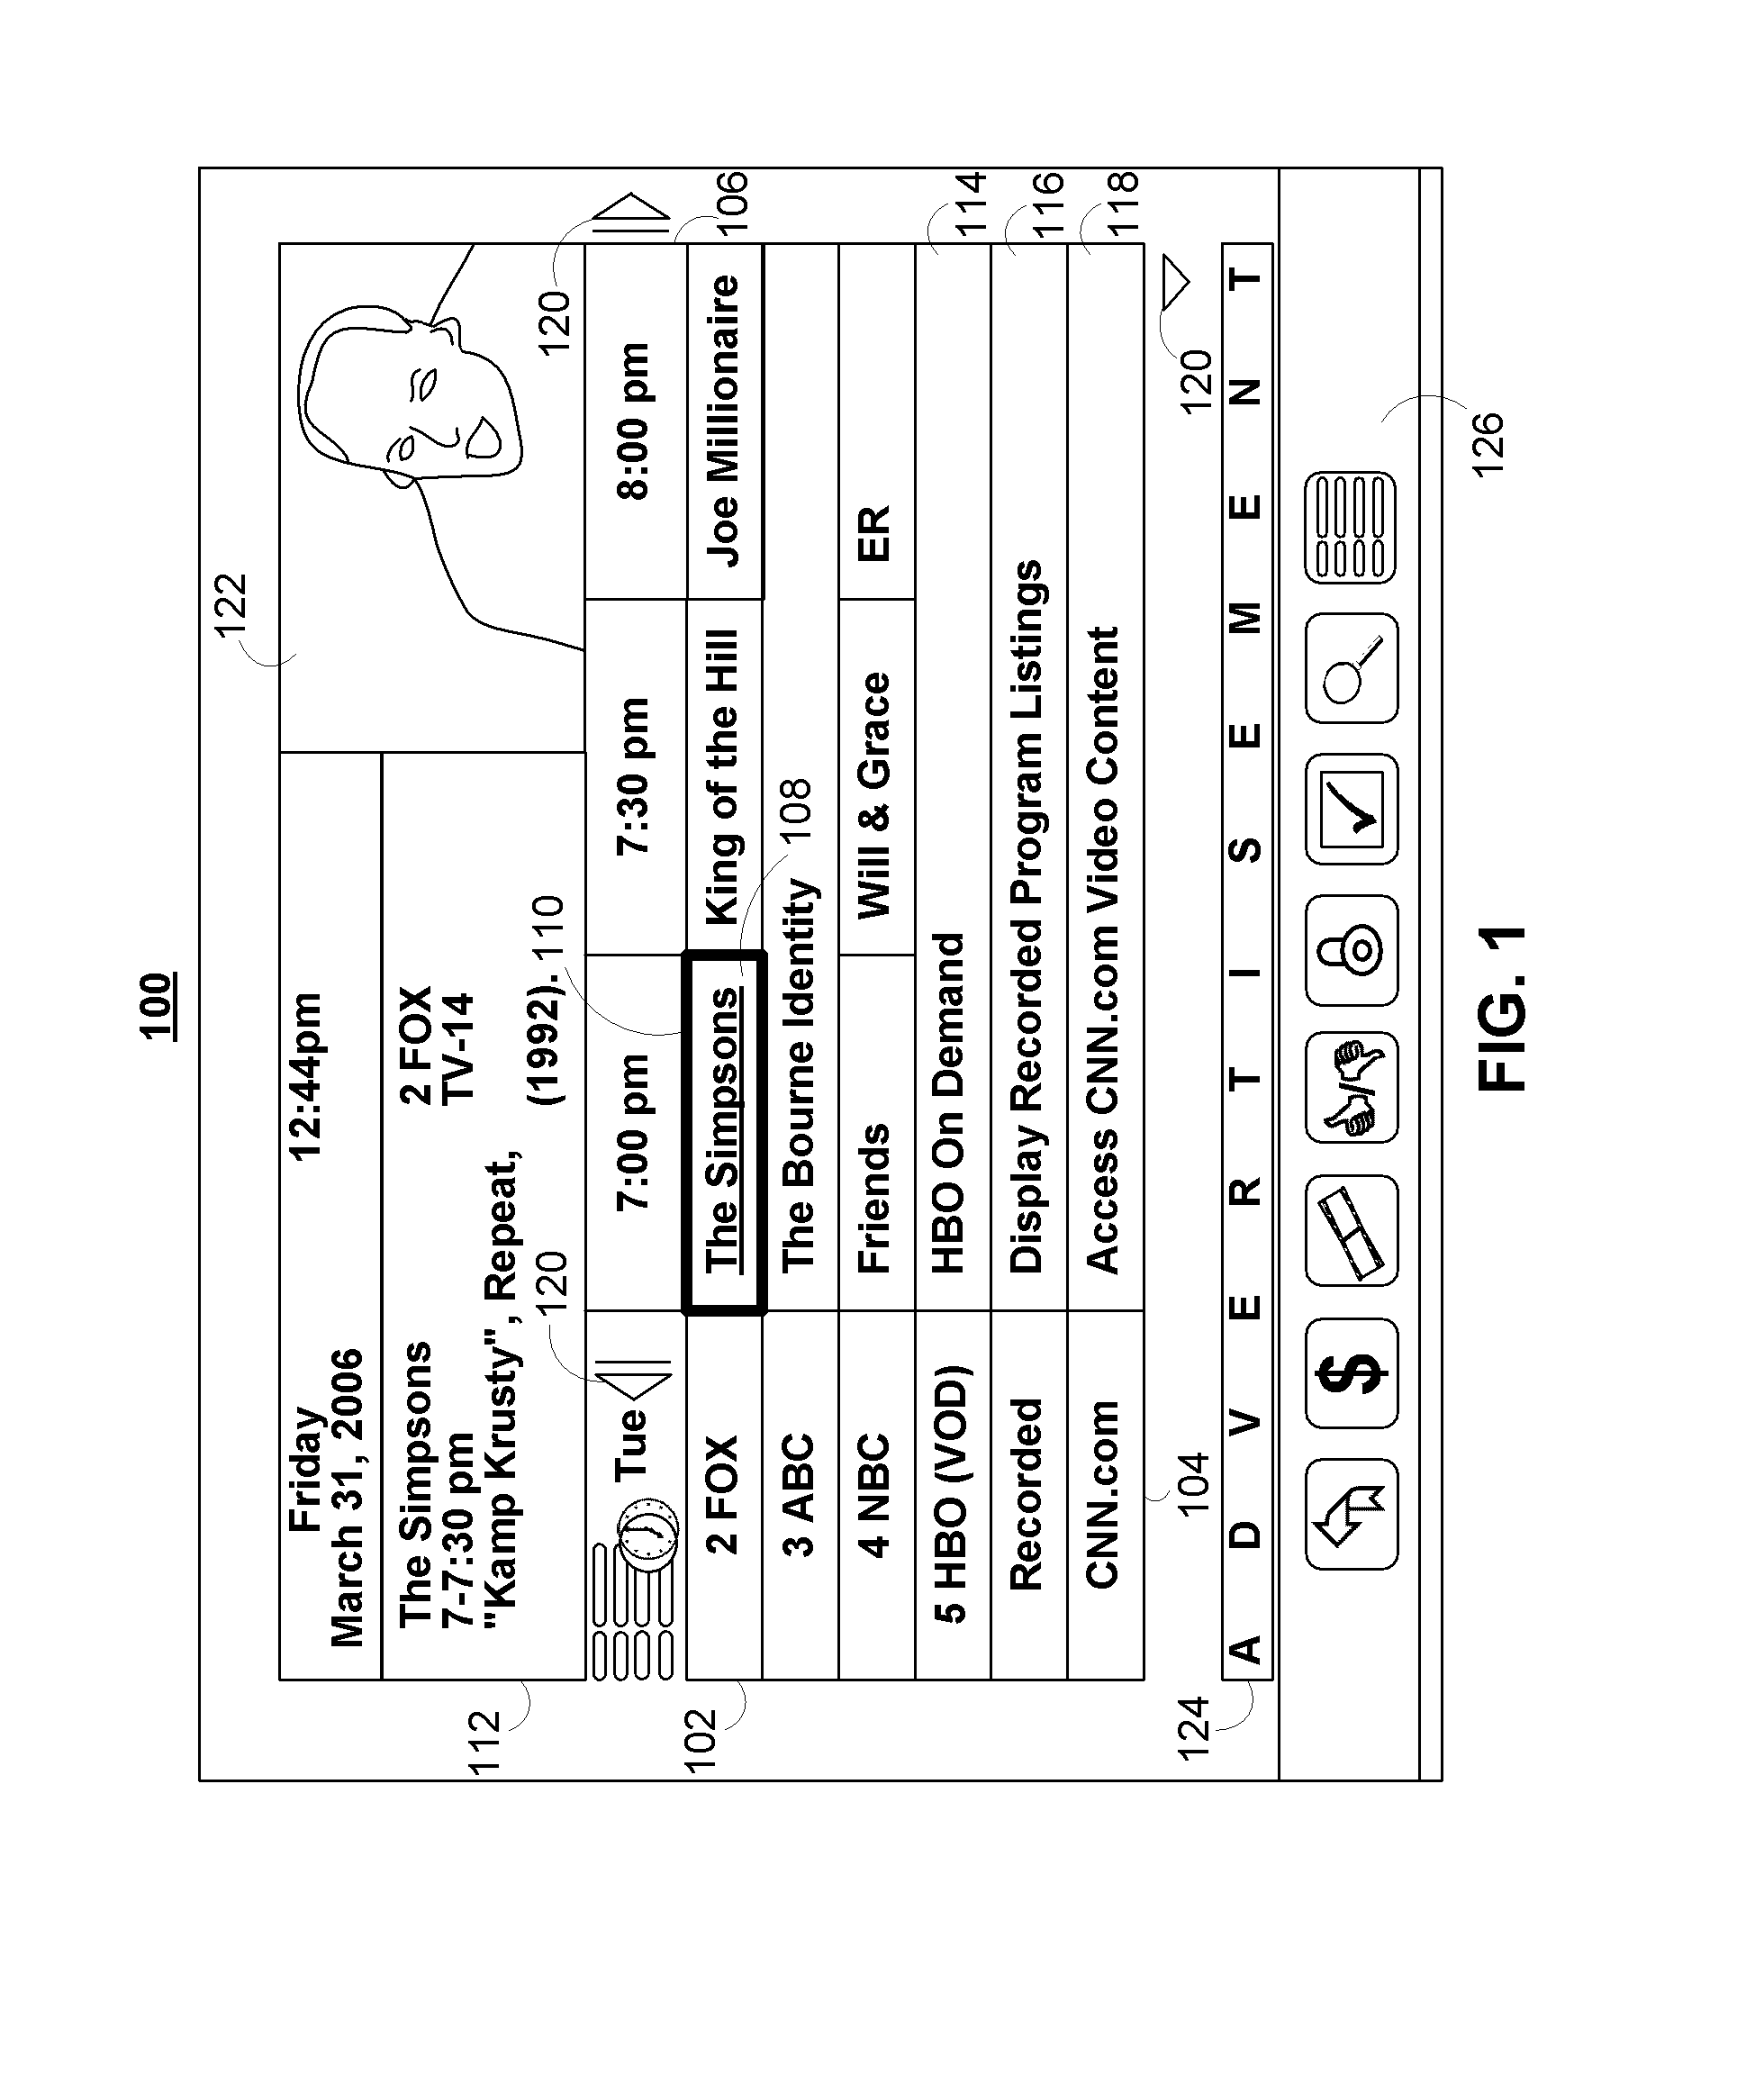 Systems and methods for providing remote program ordering on a user device via a web server